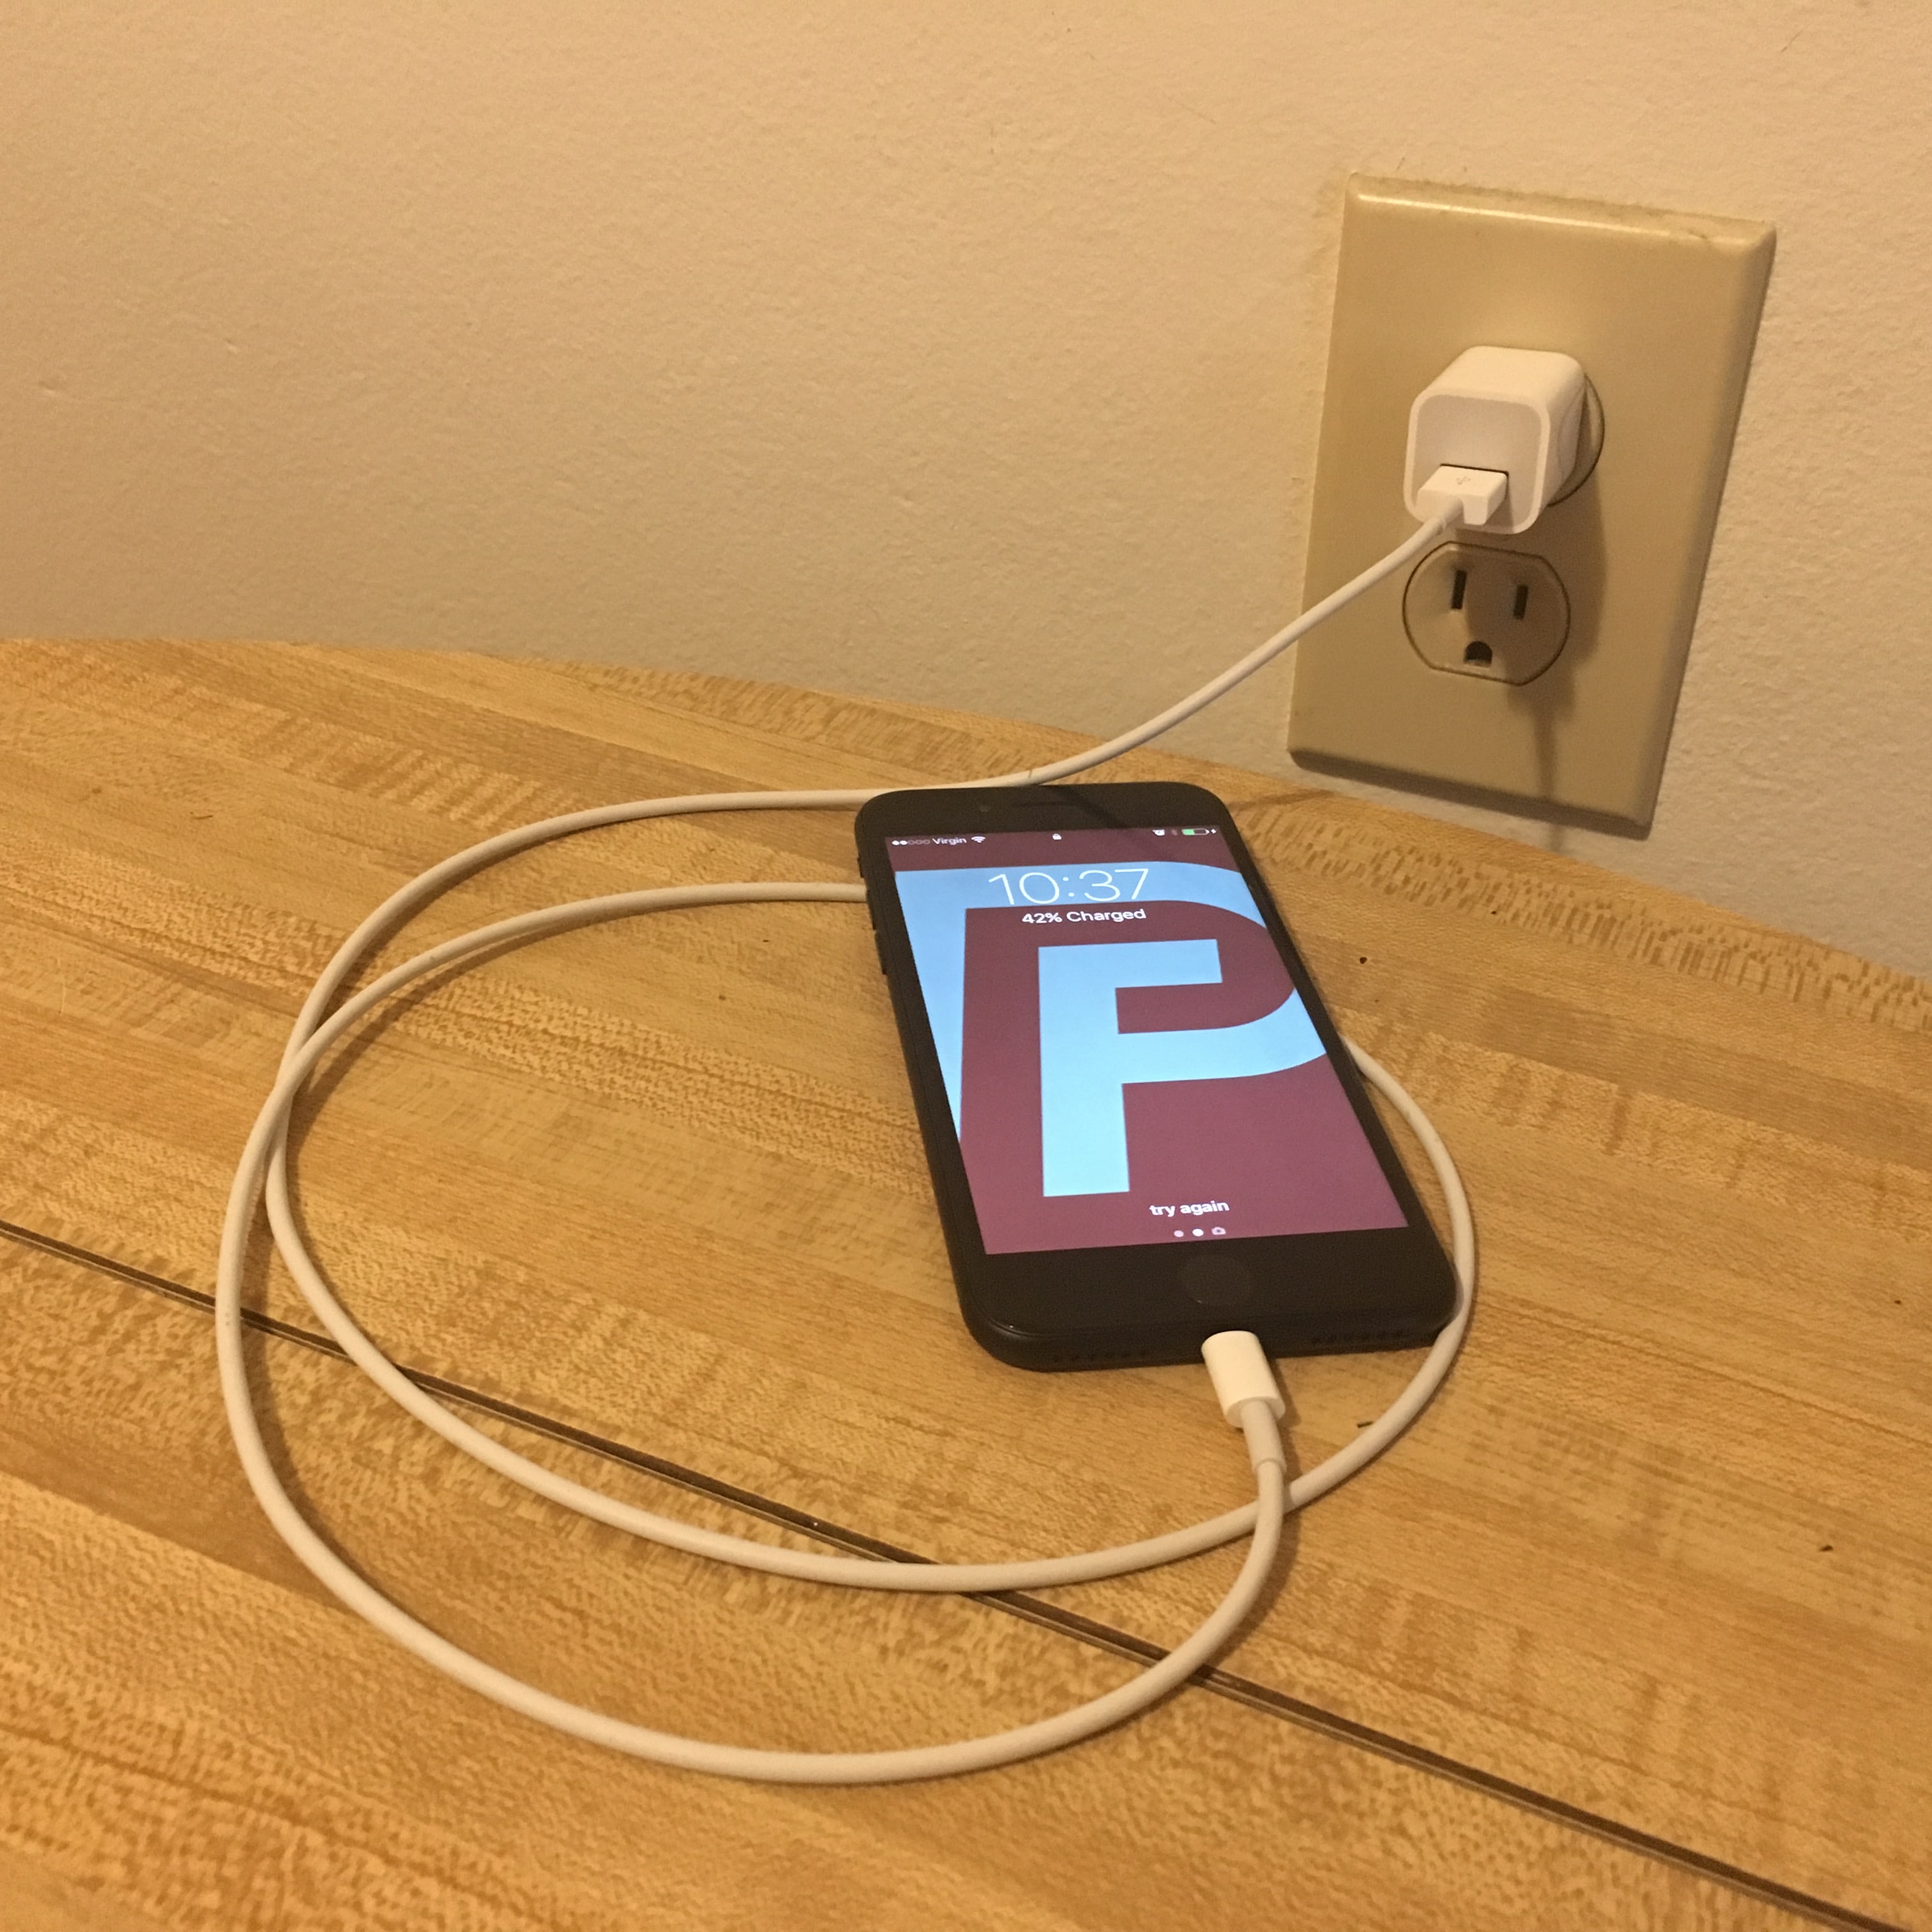 iPhone plugged into wall charger